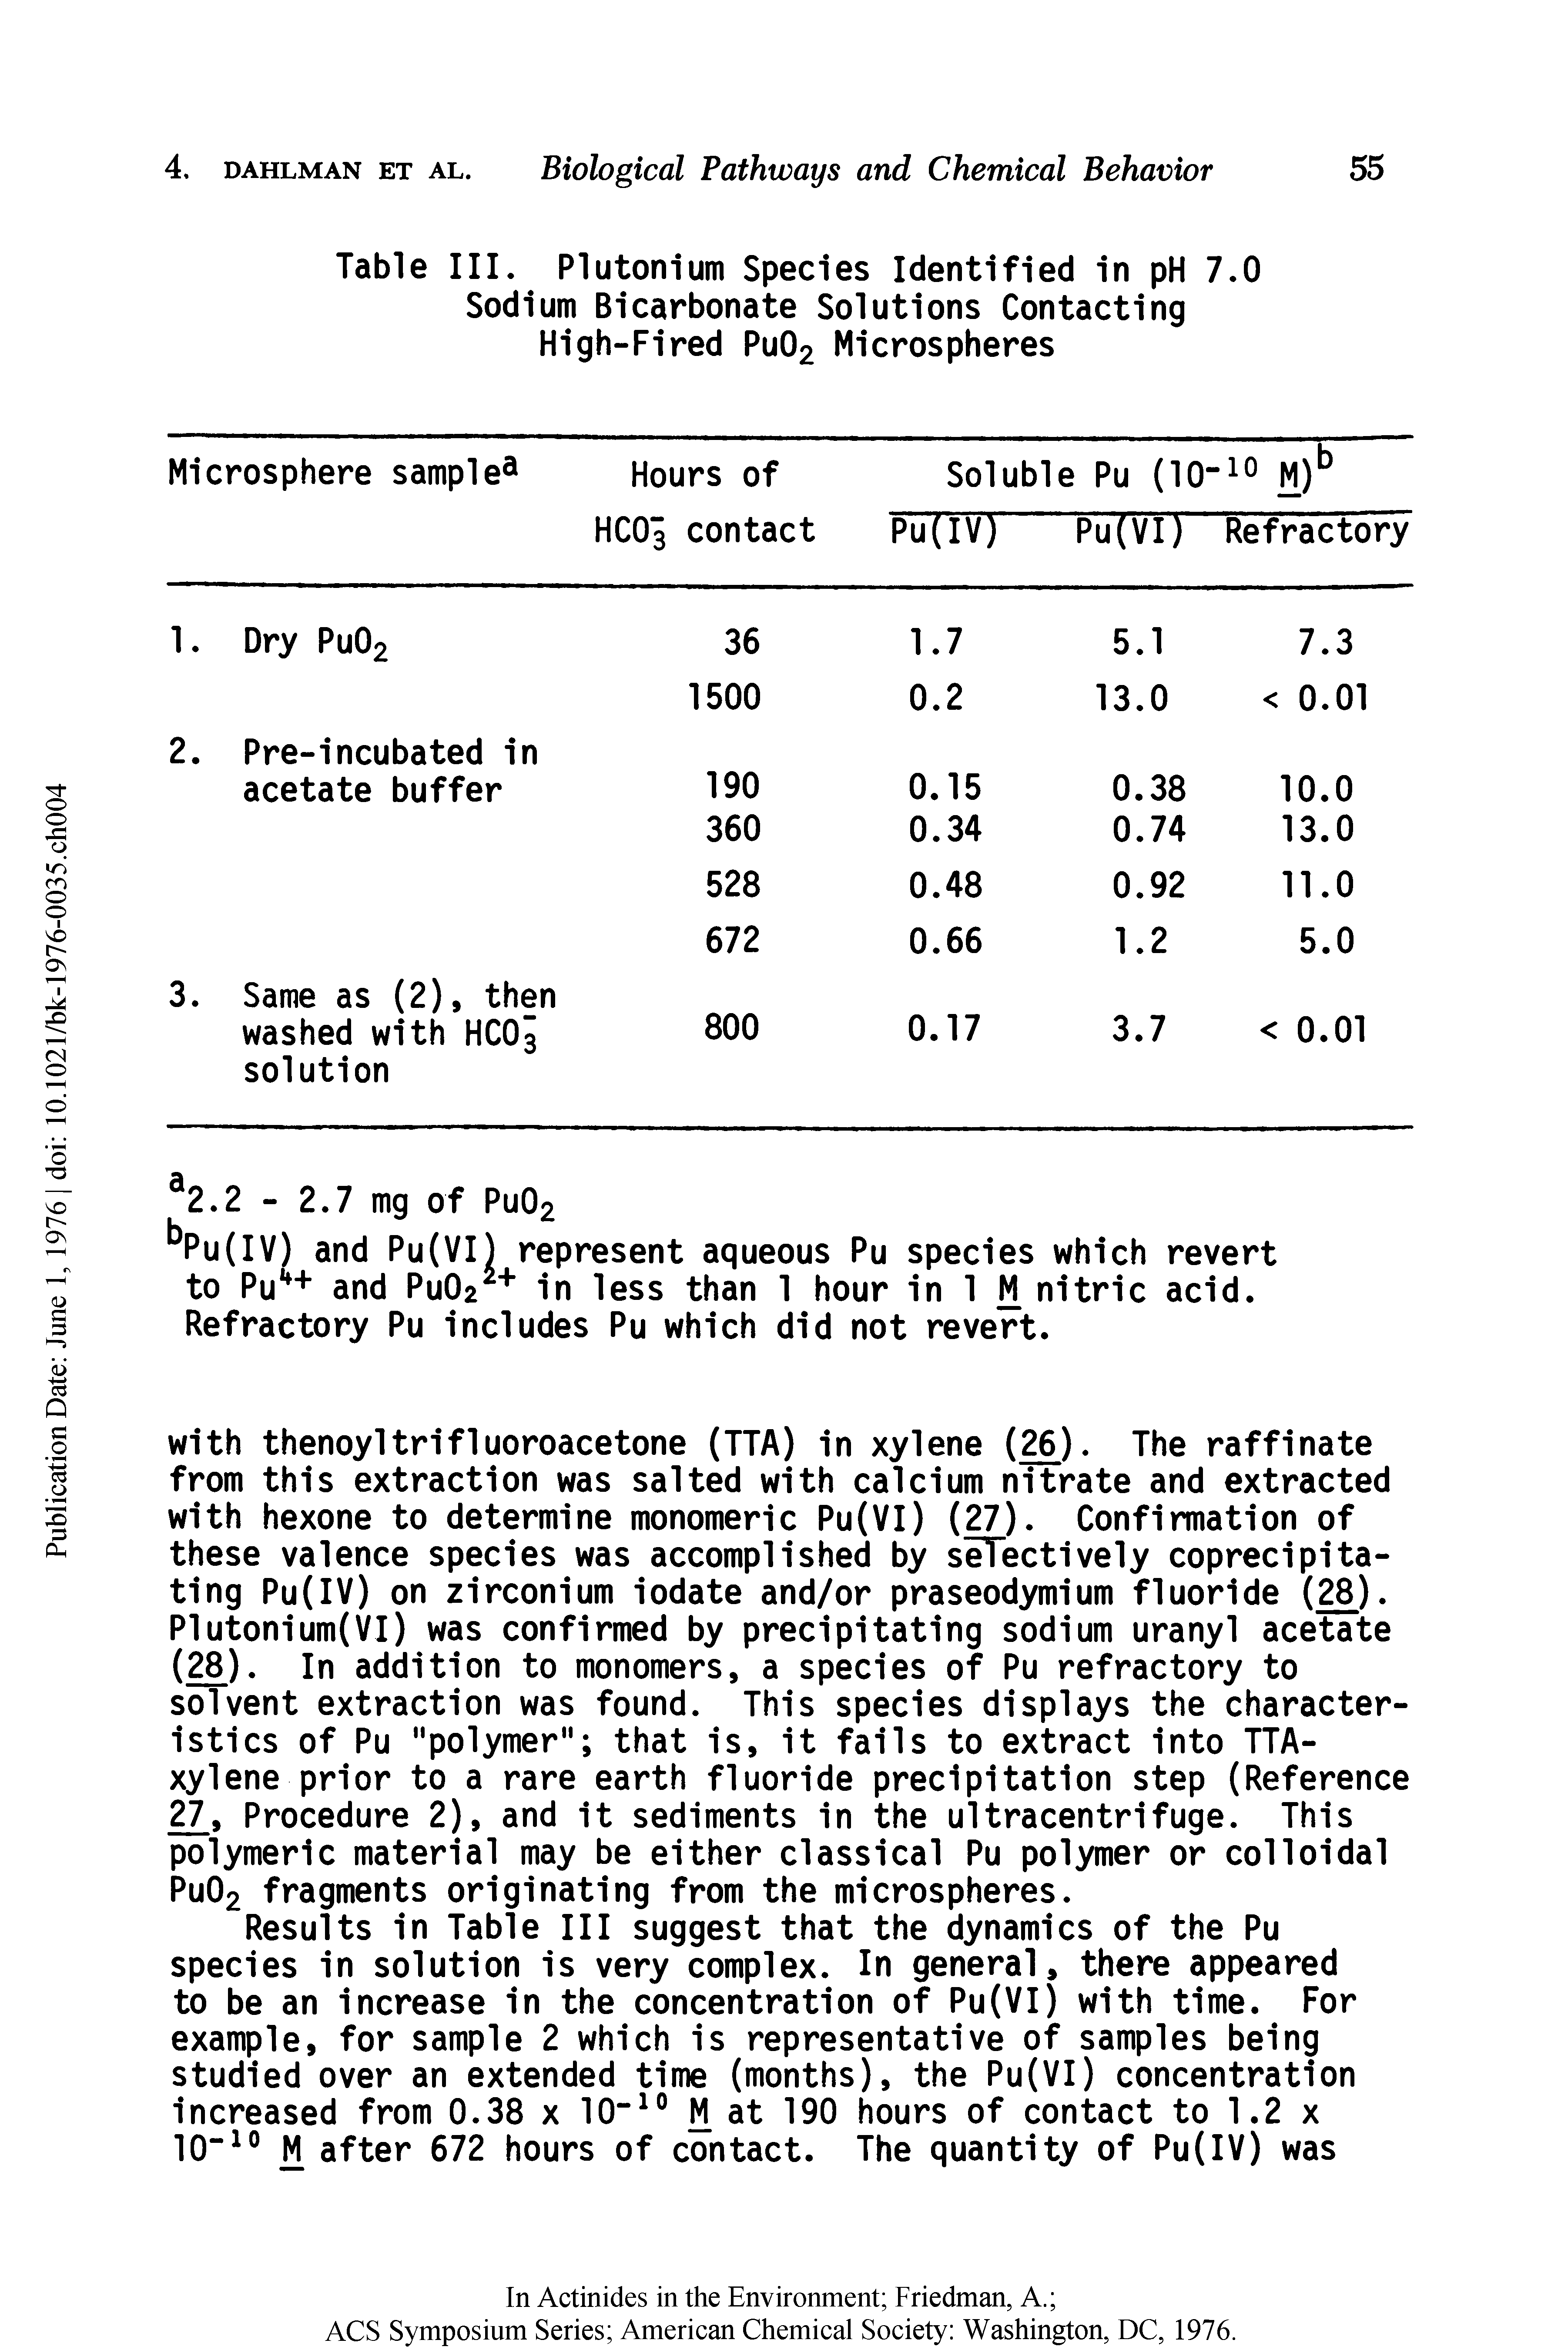 Table III. Plutonium Species Identified in pH 7.0 Sodium Bicarbonate Solutions Contacting High-Fired Pu02 Microspheres...